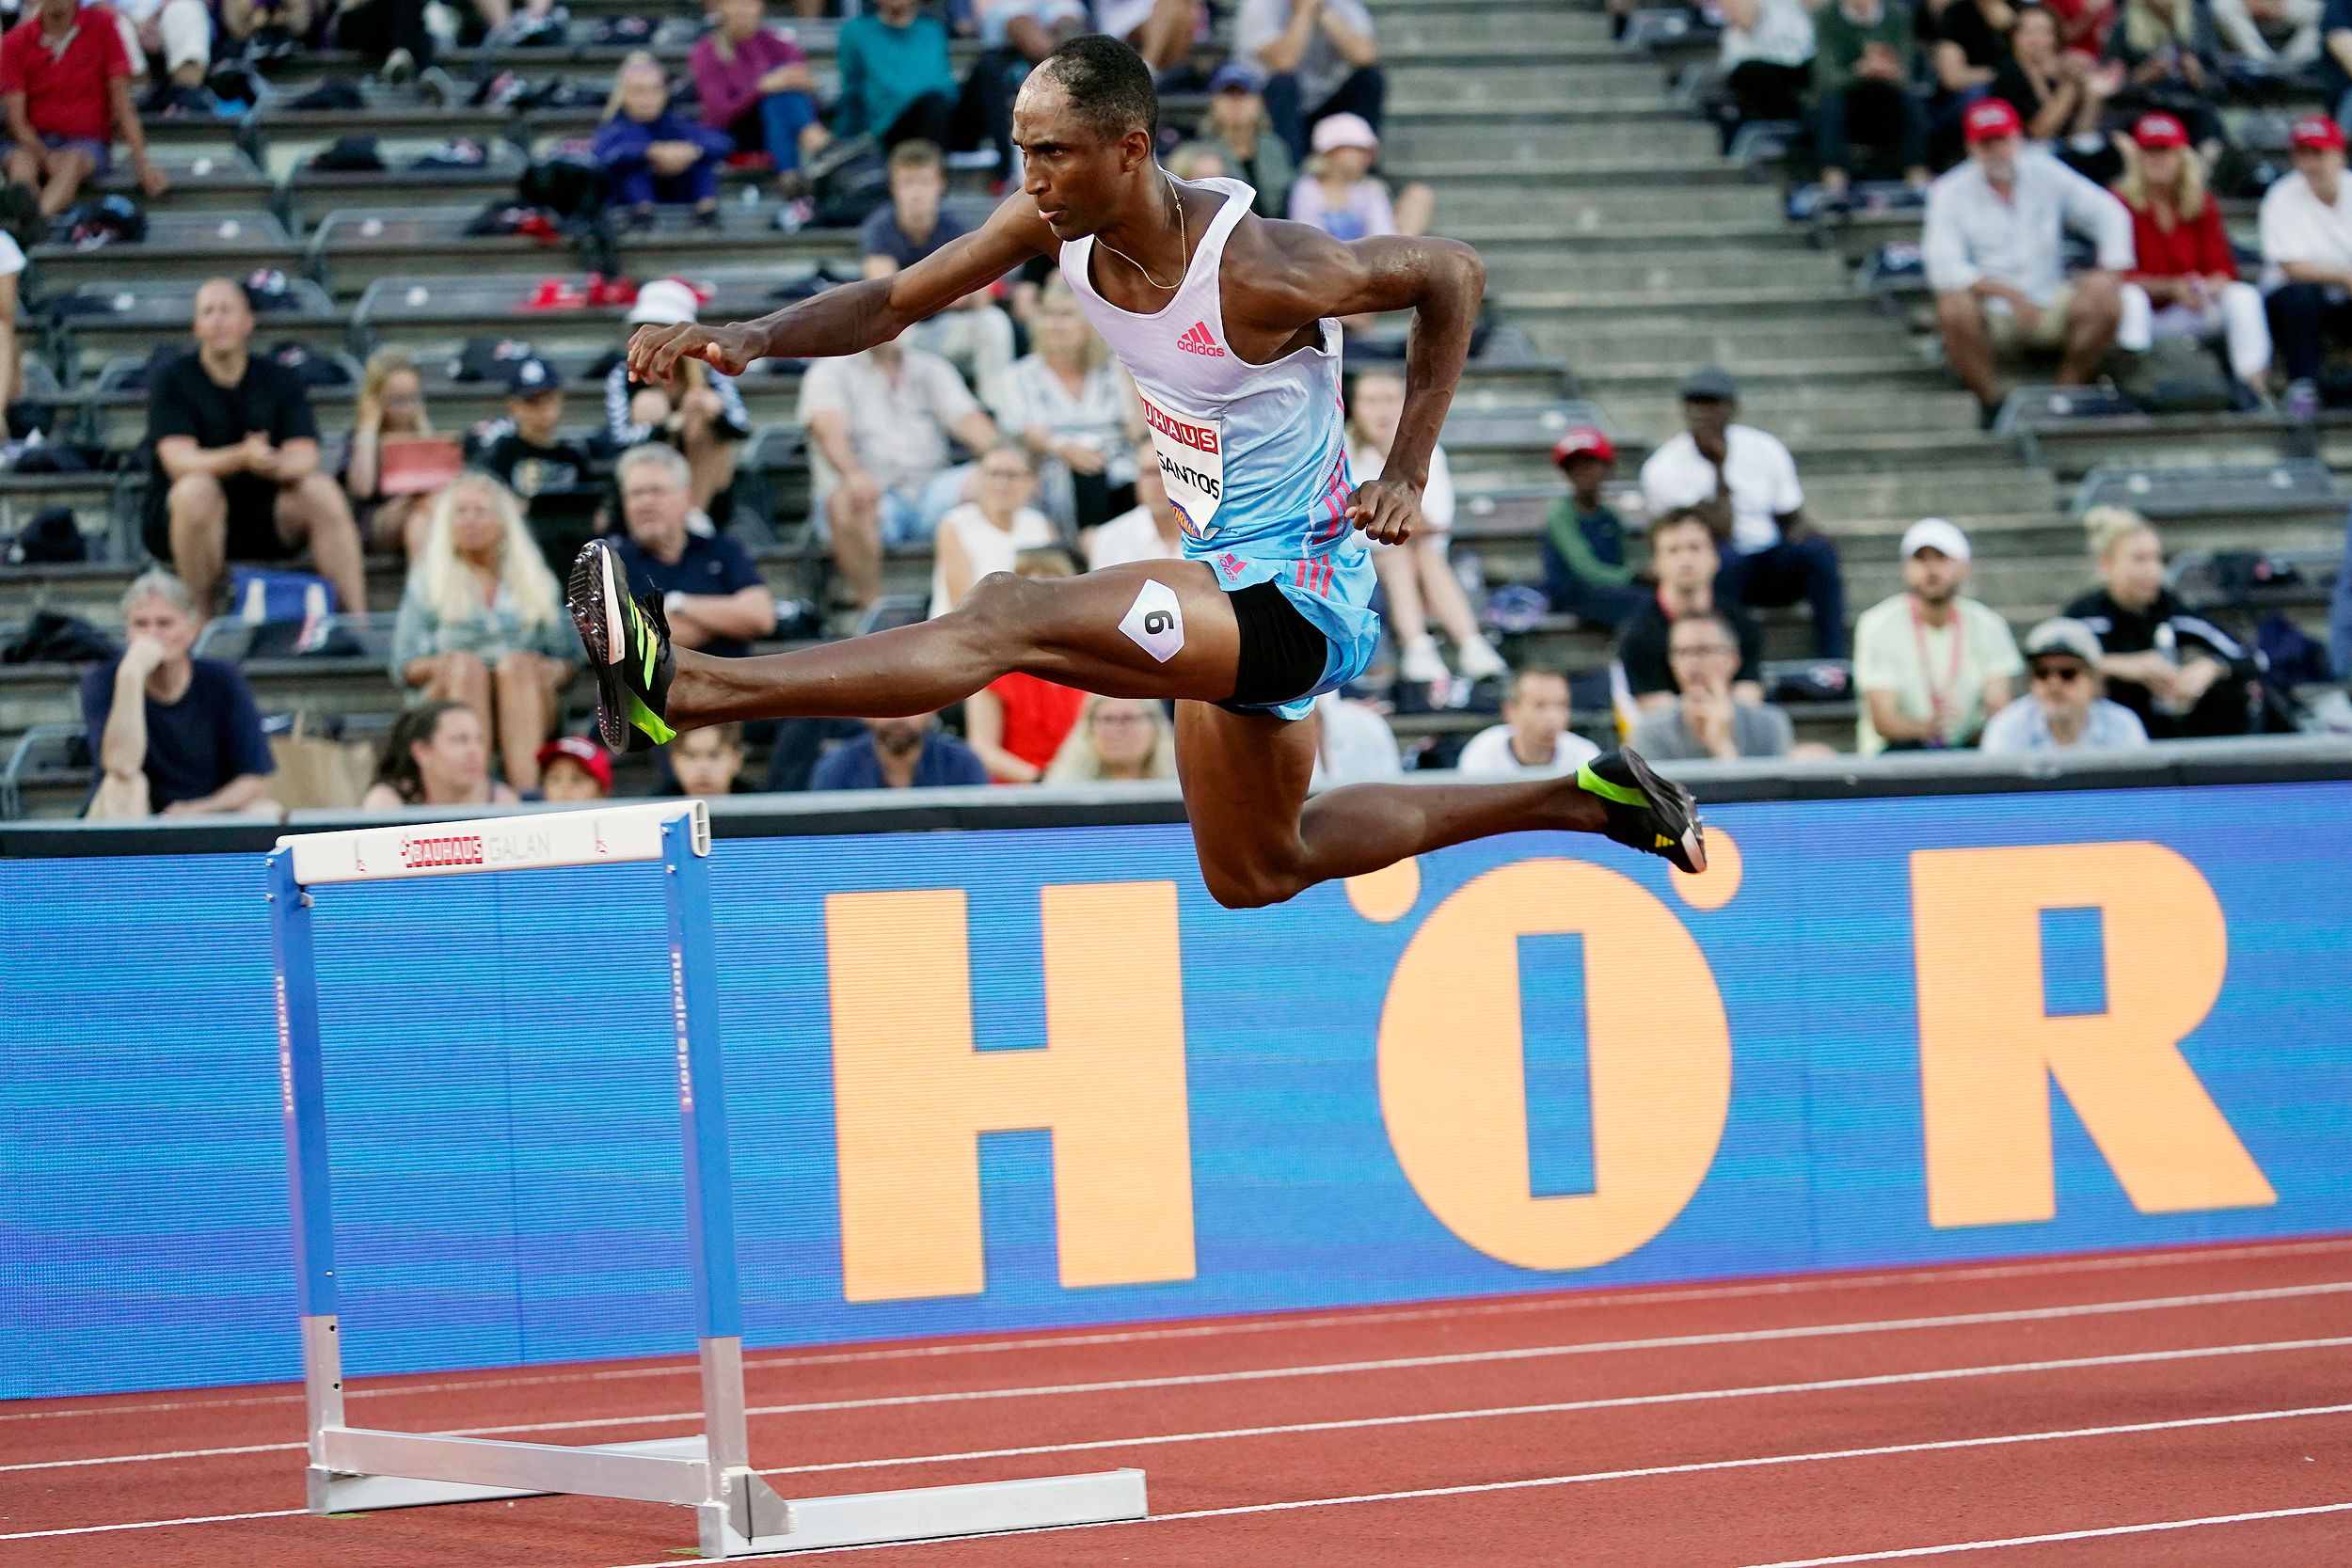 Alison Dos Santos on his way to winning the 400m hurdles at the Wanda Diamond League meeting in Stockholm